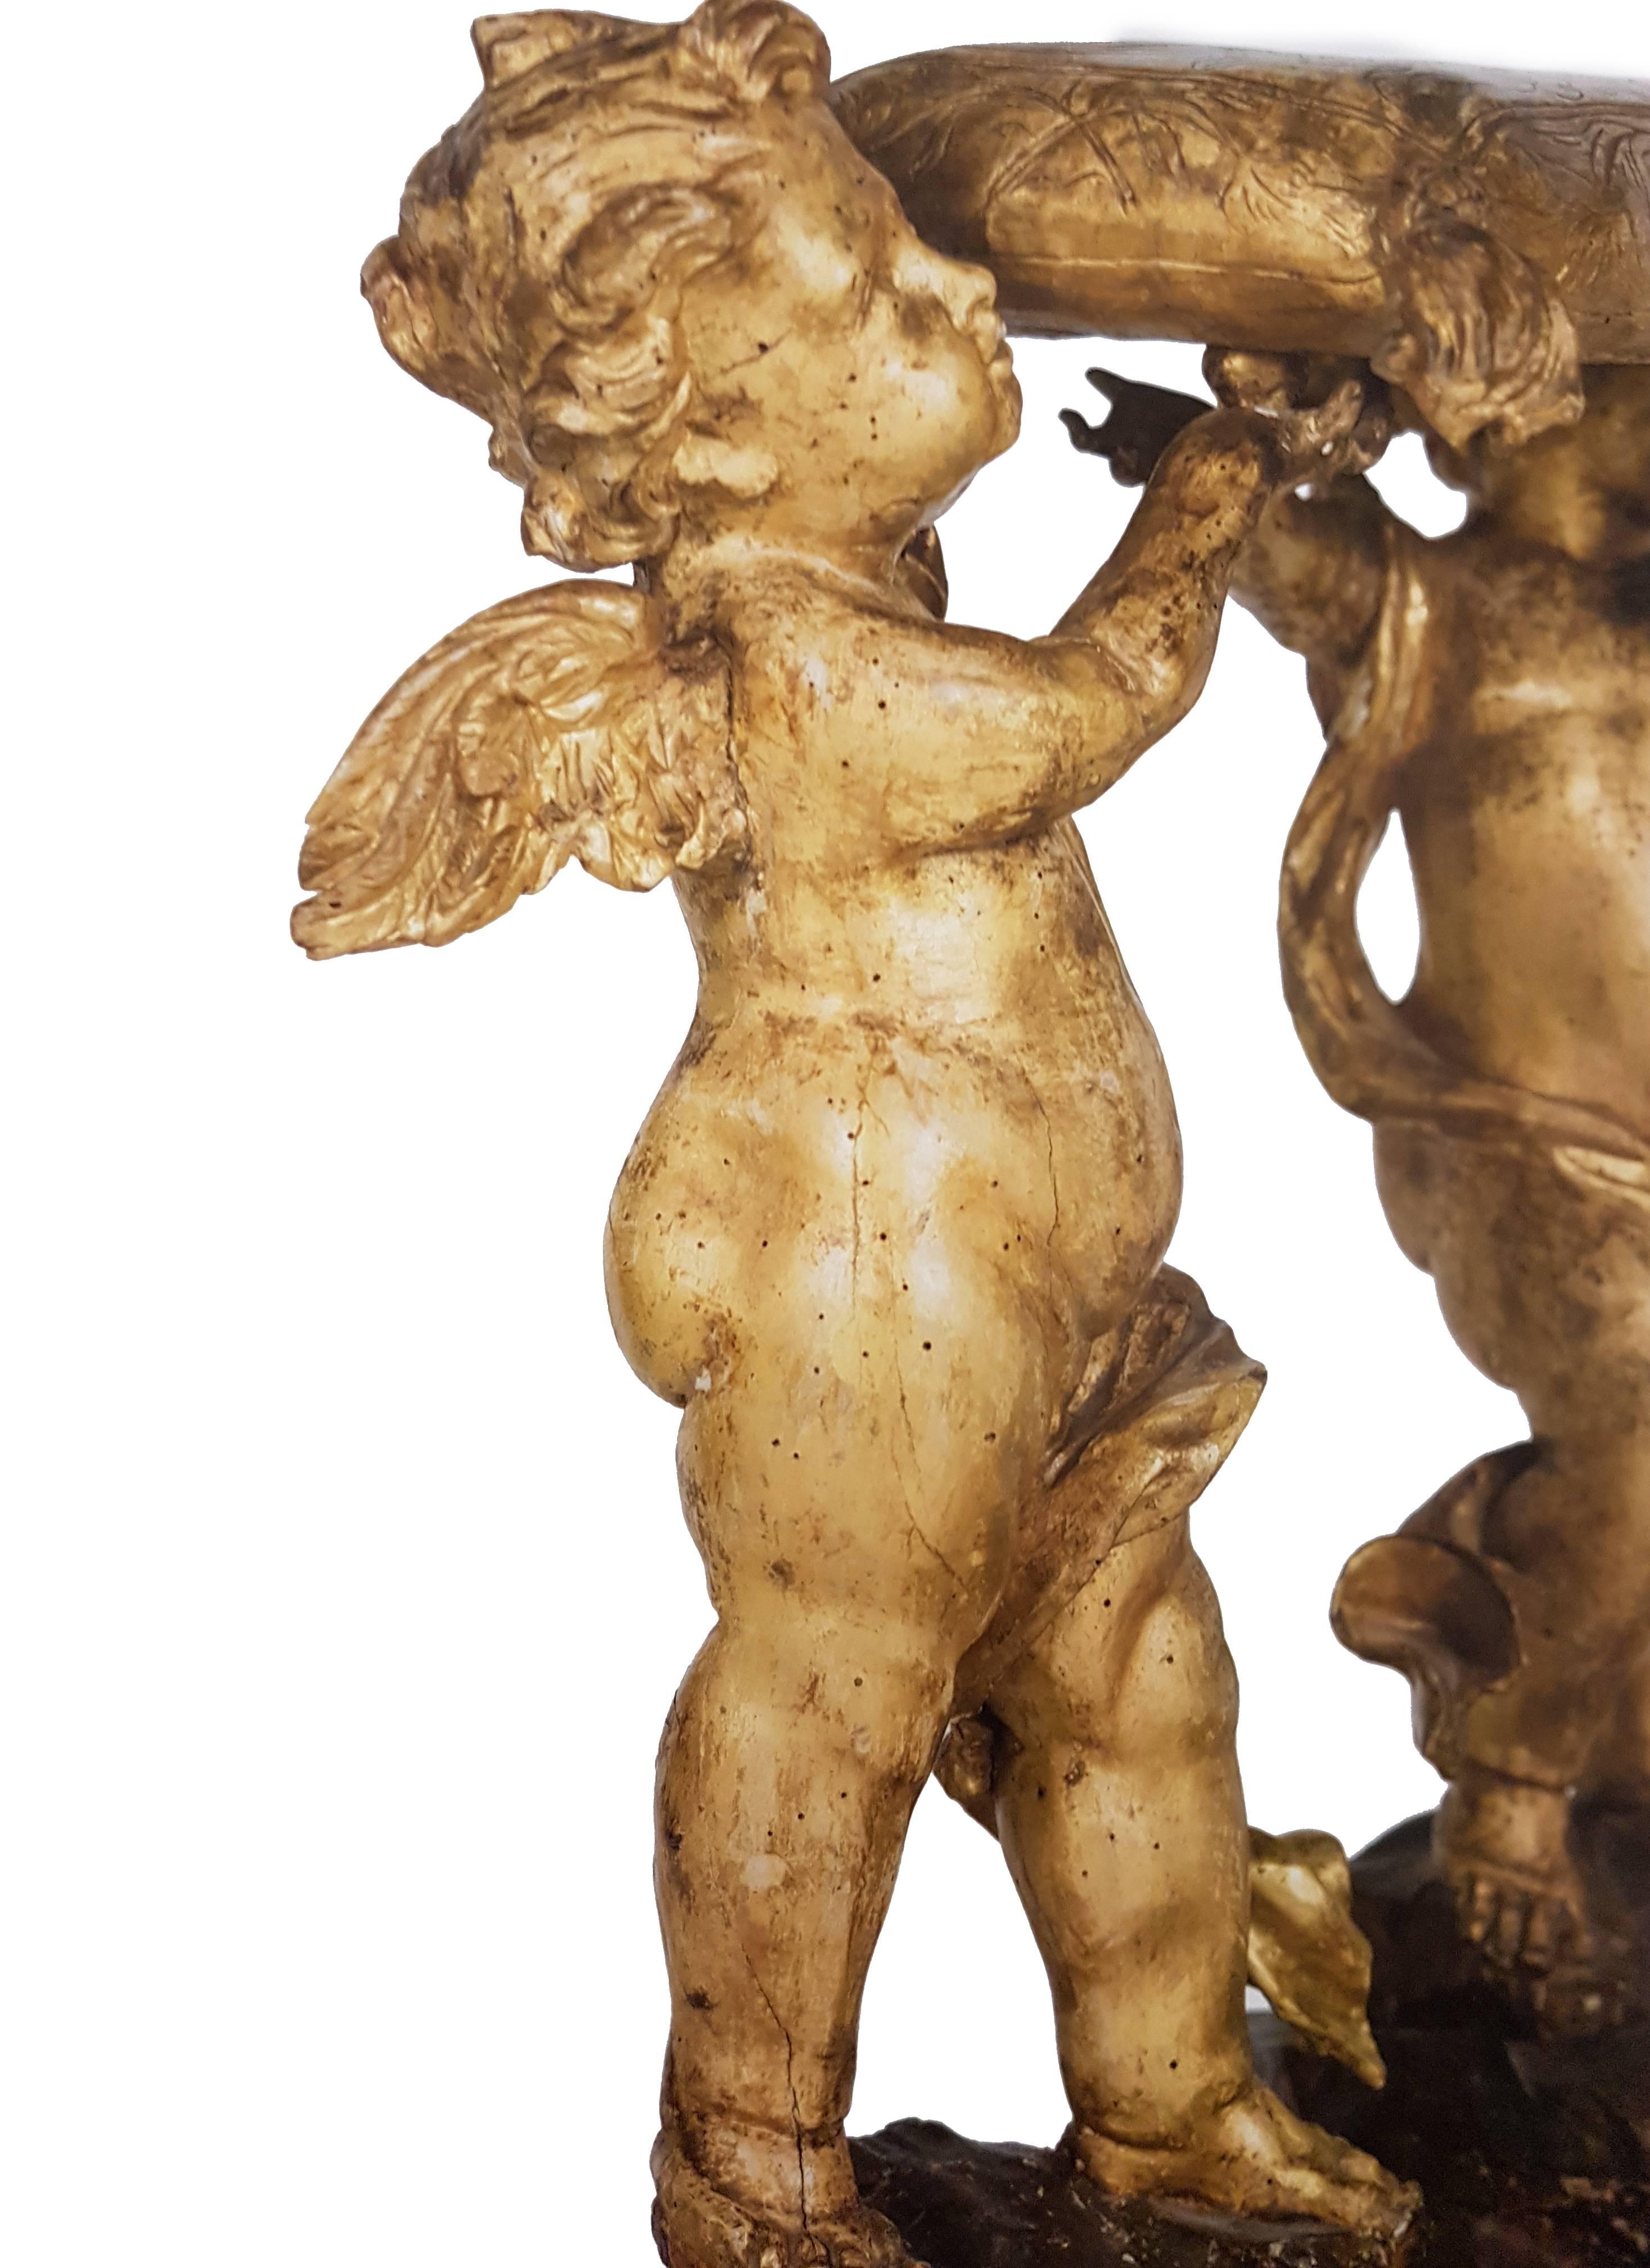 A lacquered faldstool in sculpted and gilded wood, with sculpted winged cherubs upholding a tasseled cushion.

Genoa, late 17th-early 18th century.